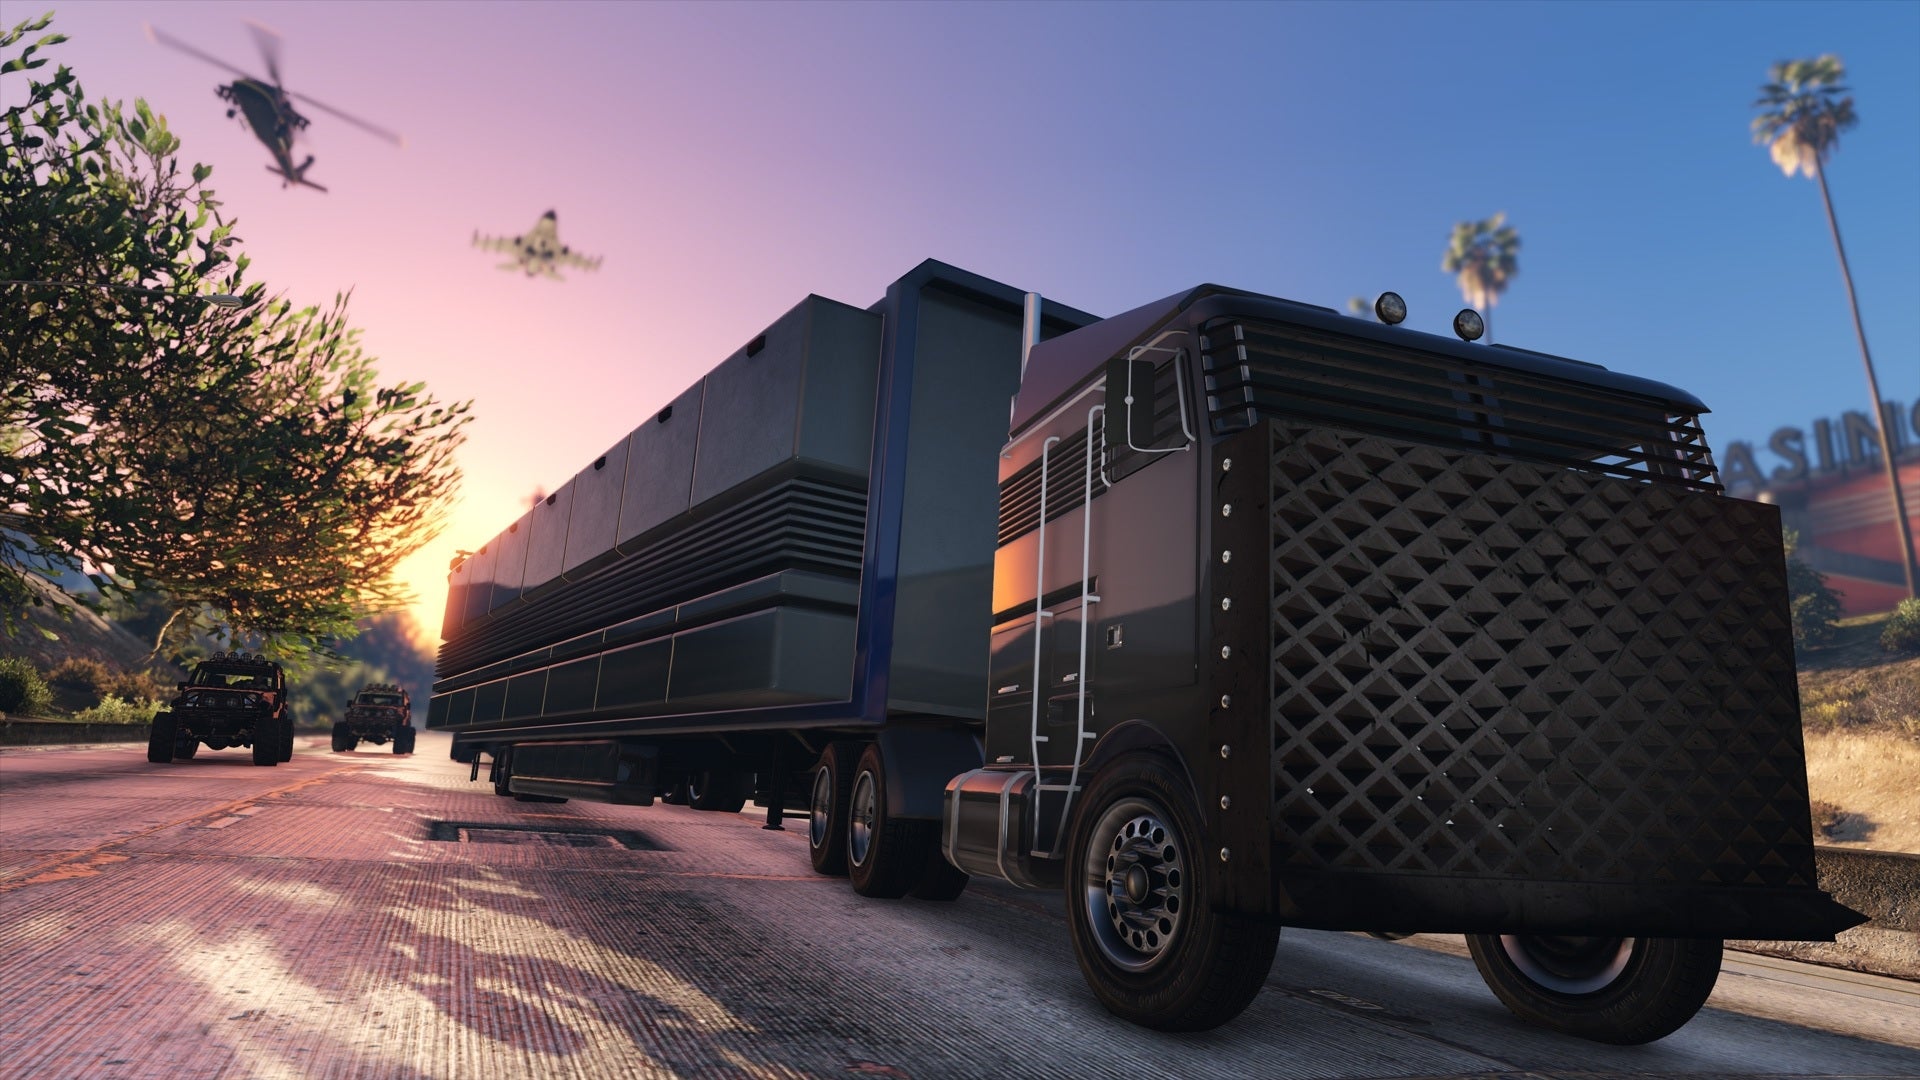 The mobile operations centre in GTA Online.